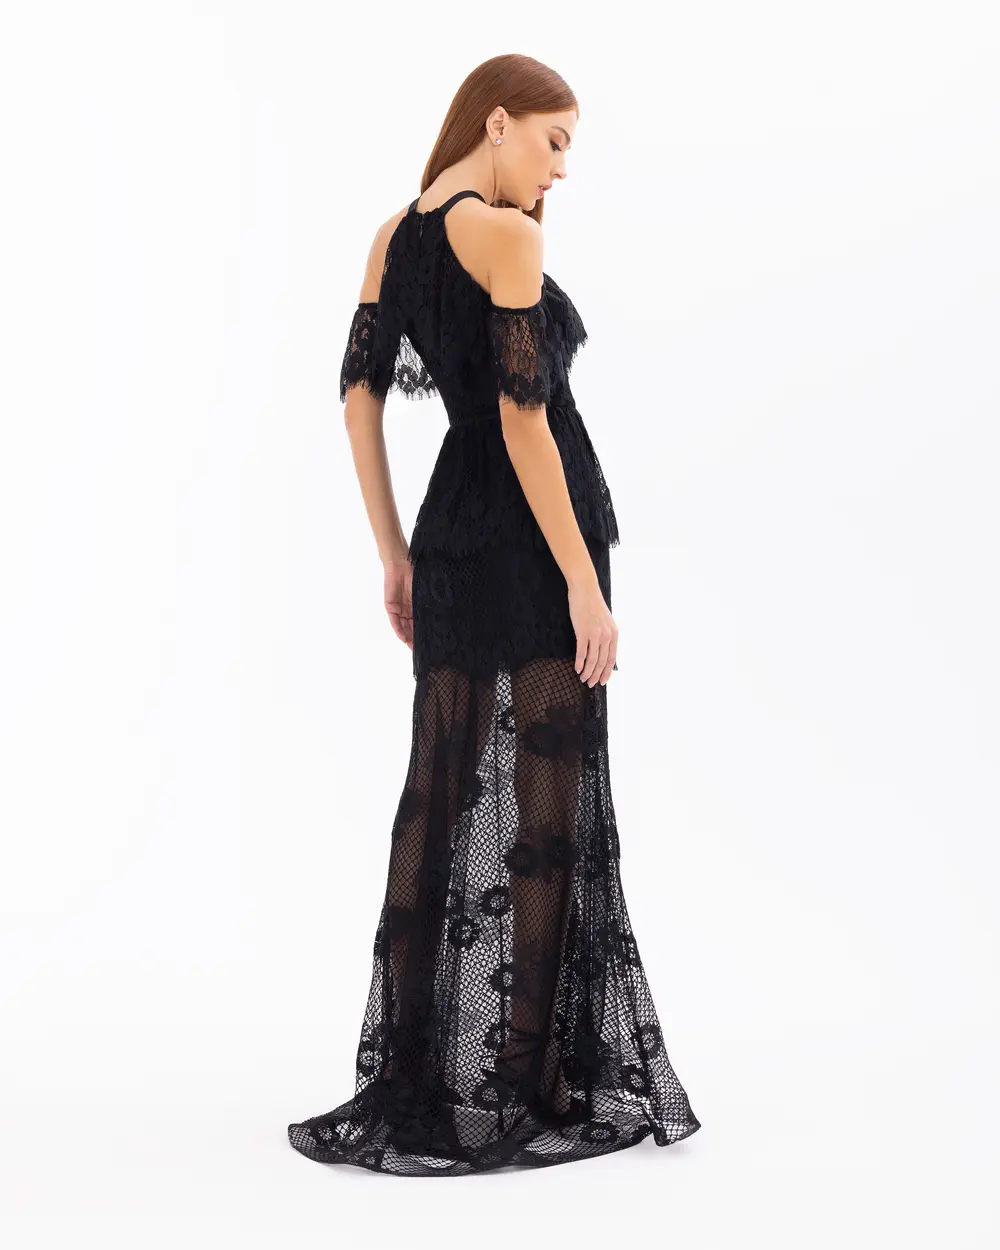 Halter Neck Lace Evening Dress with Slits